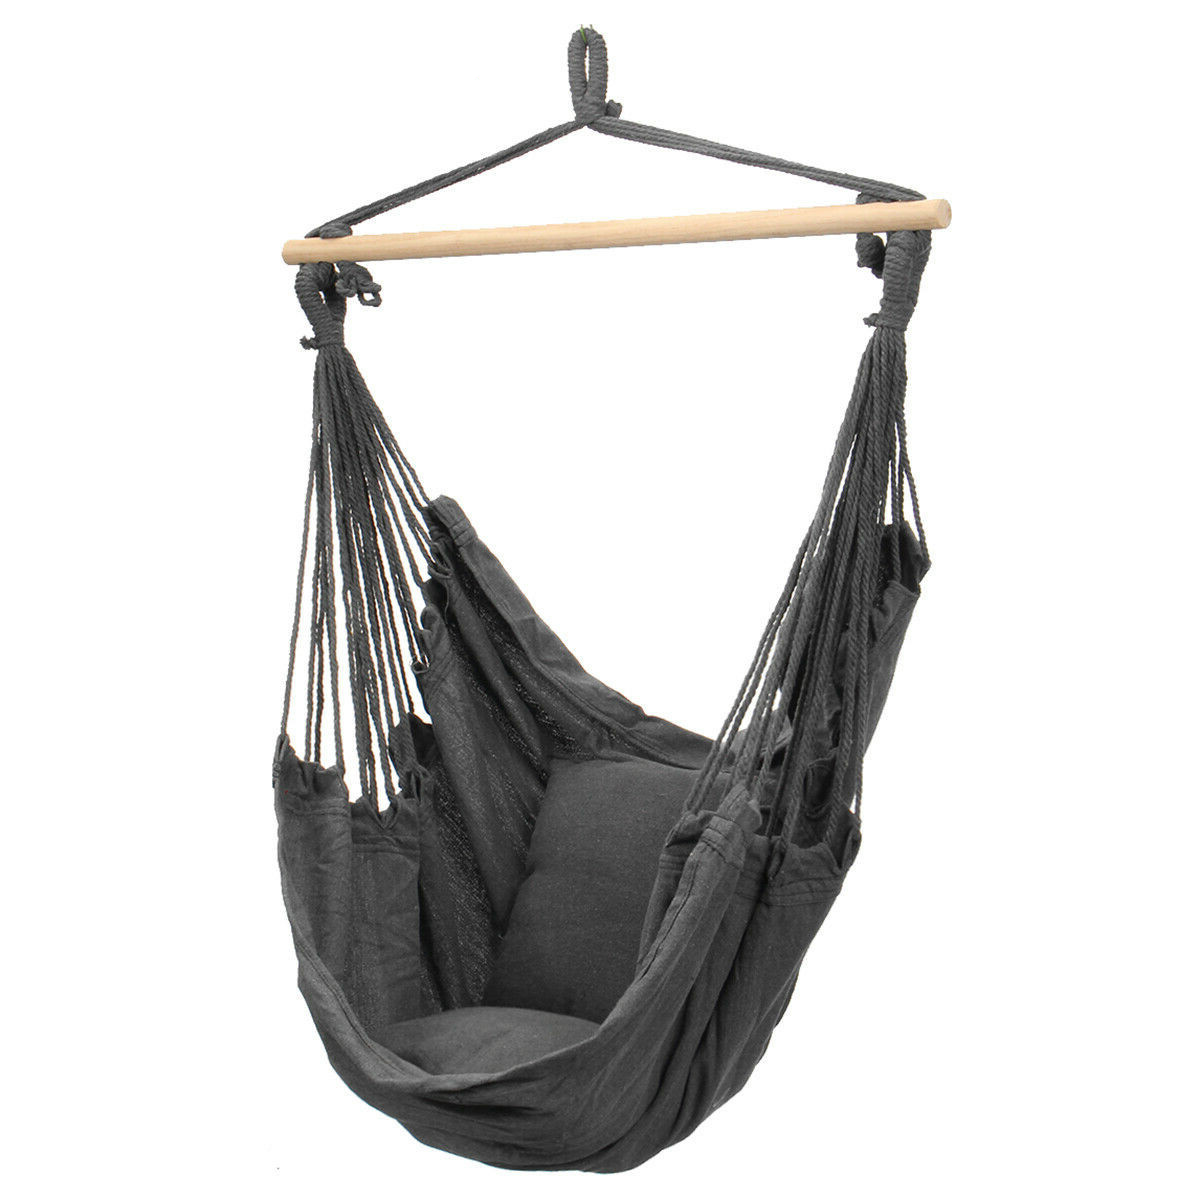 Deluxe Hanging Hammock Chair With Cushions